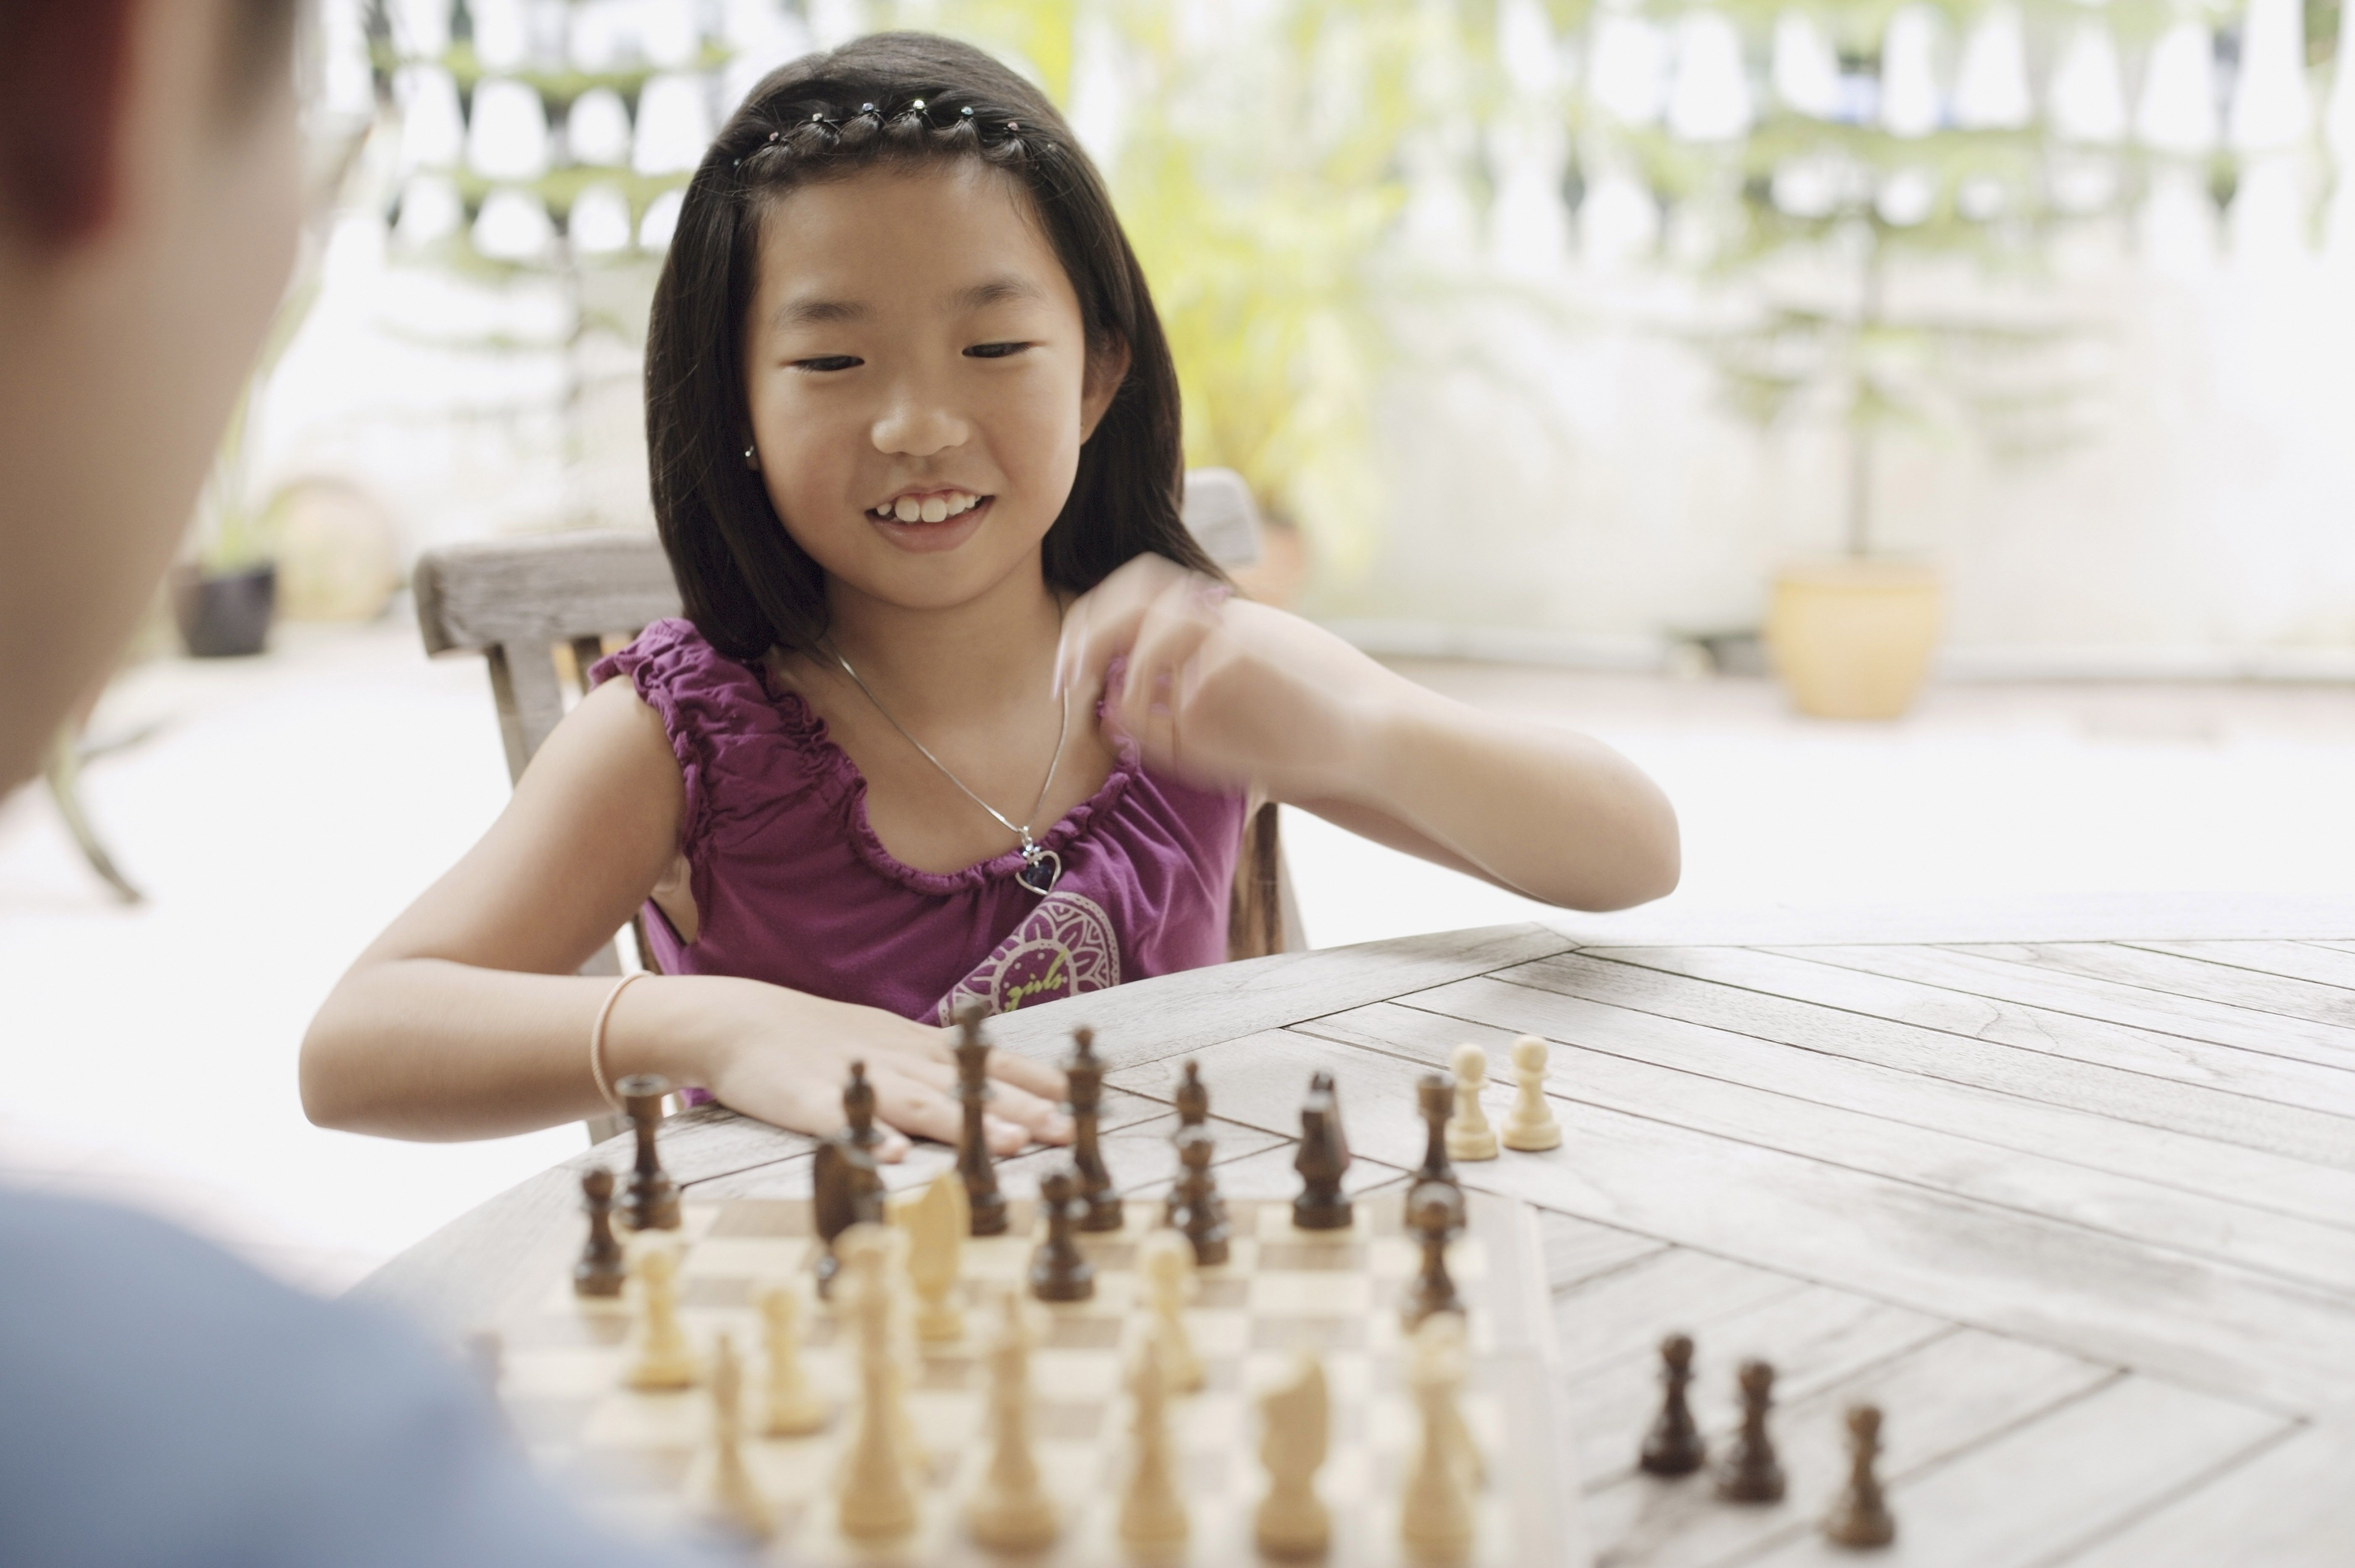 3 things to consider before you let your child play chess online